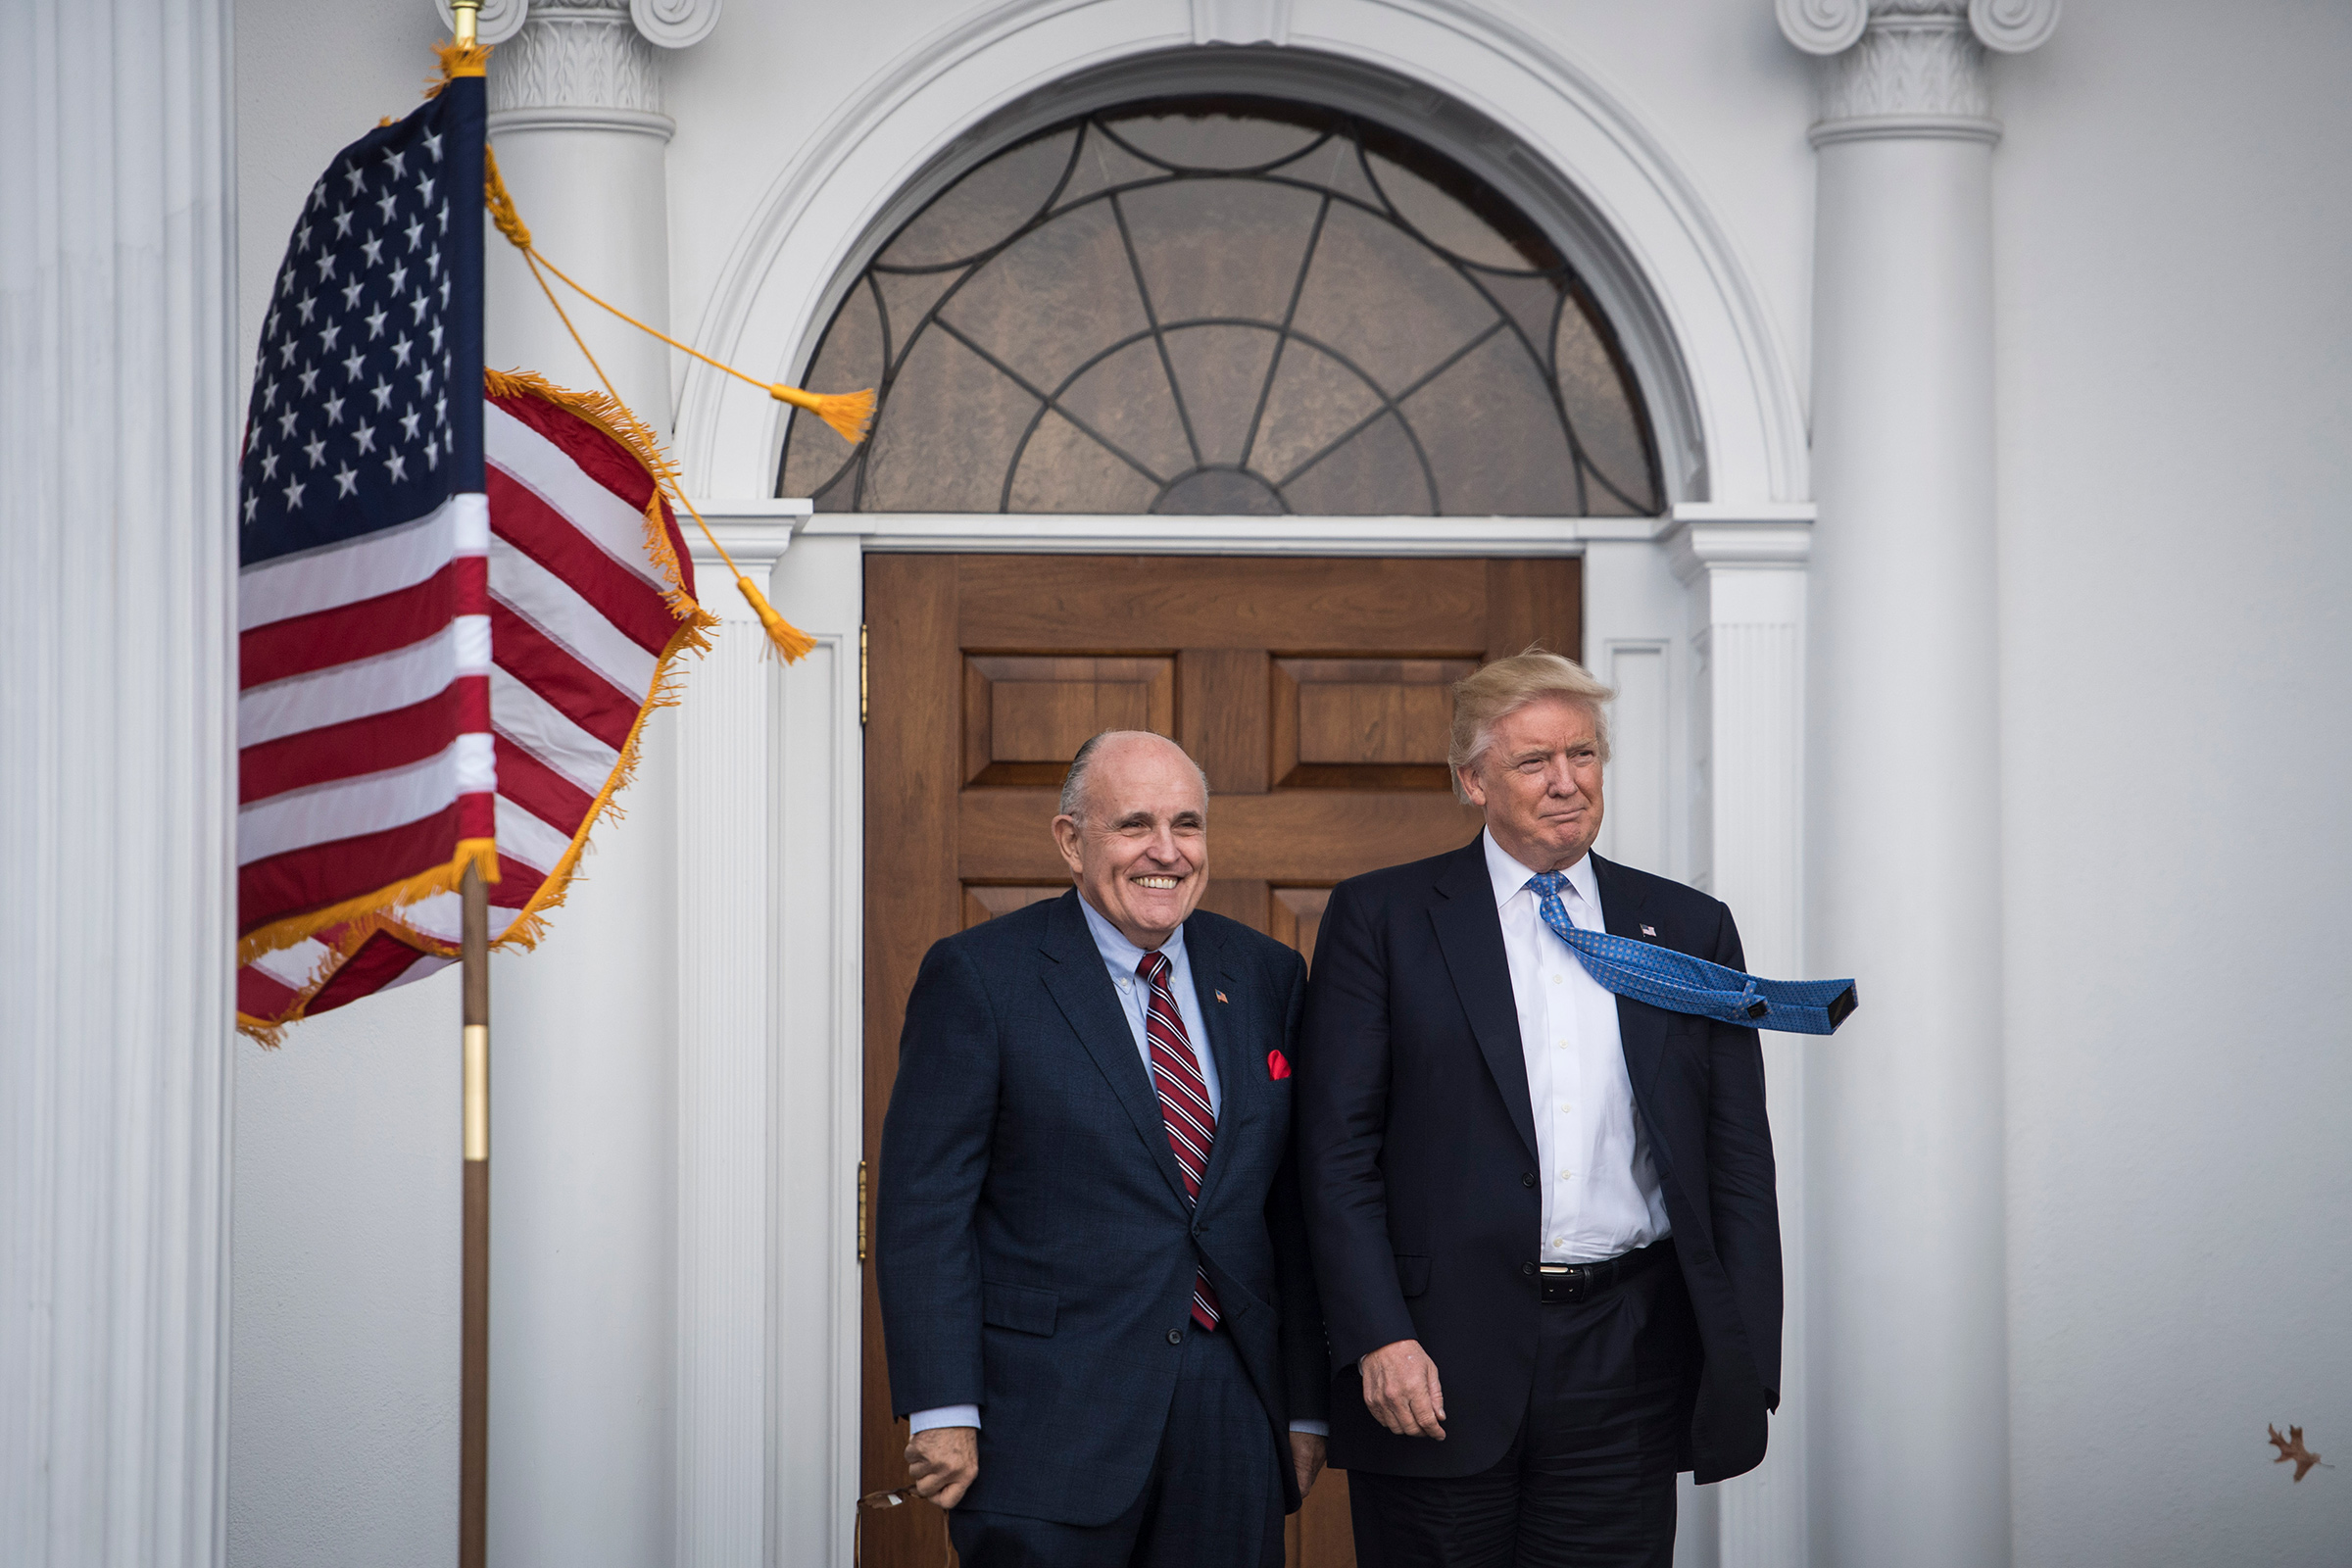 Former President Donald Trump greets Rudy Giuliani at the clubhouse at Trump National Golf Club Bedminster in Bedminster Township, N.J. on Nov. 20, 2016. (Jabin Botsford—The Washington Post/Getty Images)